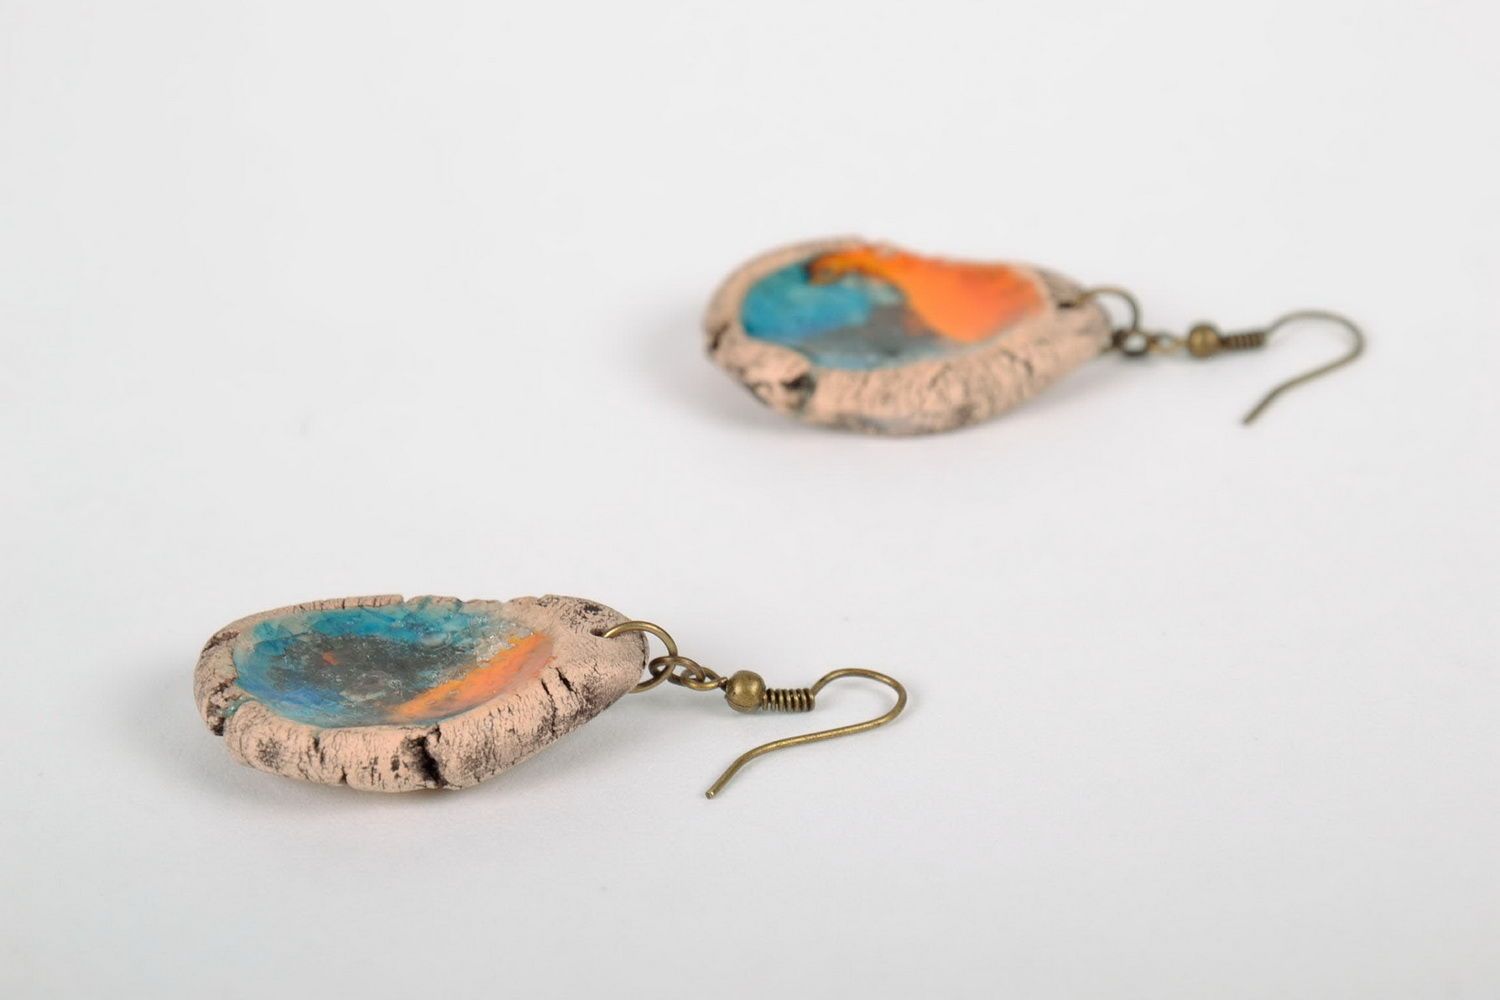 Ceramic and glass earrings photo 3